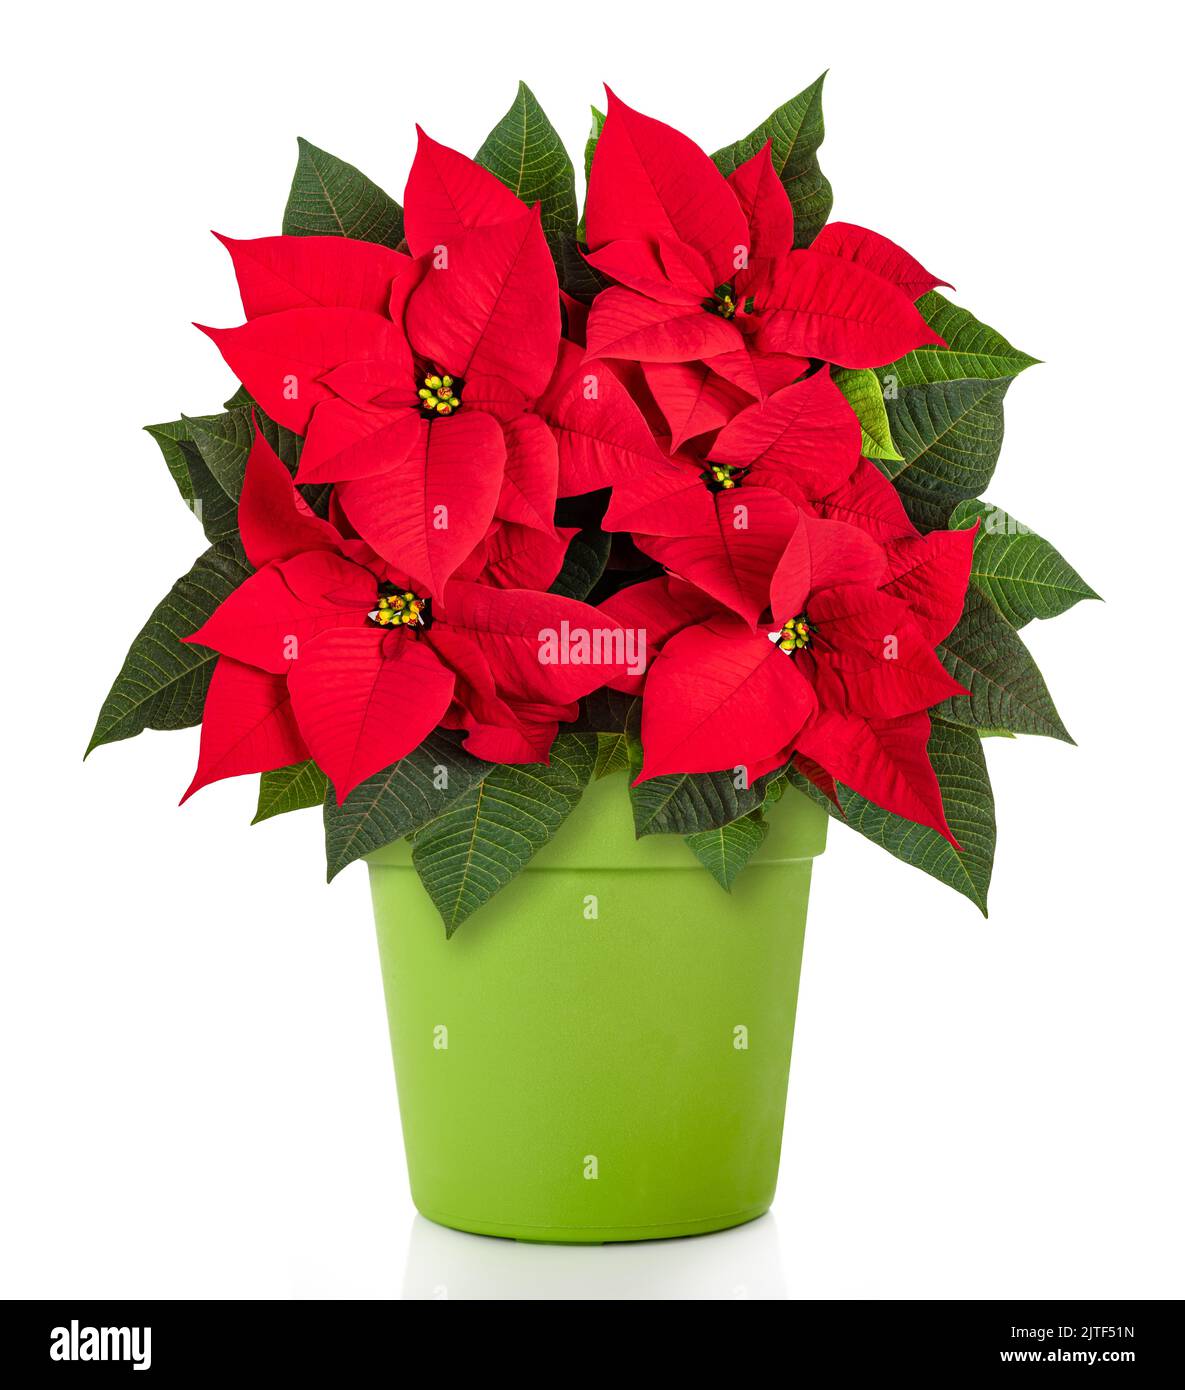 Red poinsettia plant in a green vase isolated on white Stock Photo